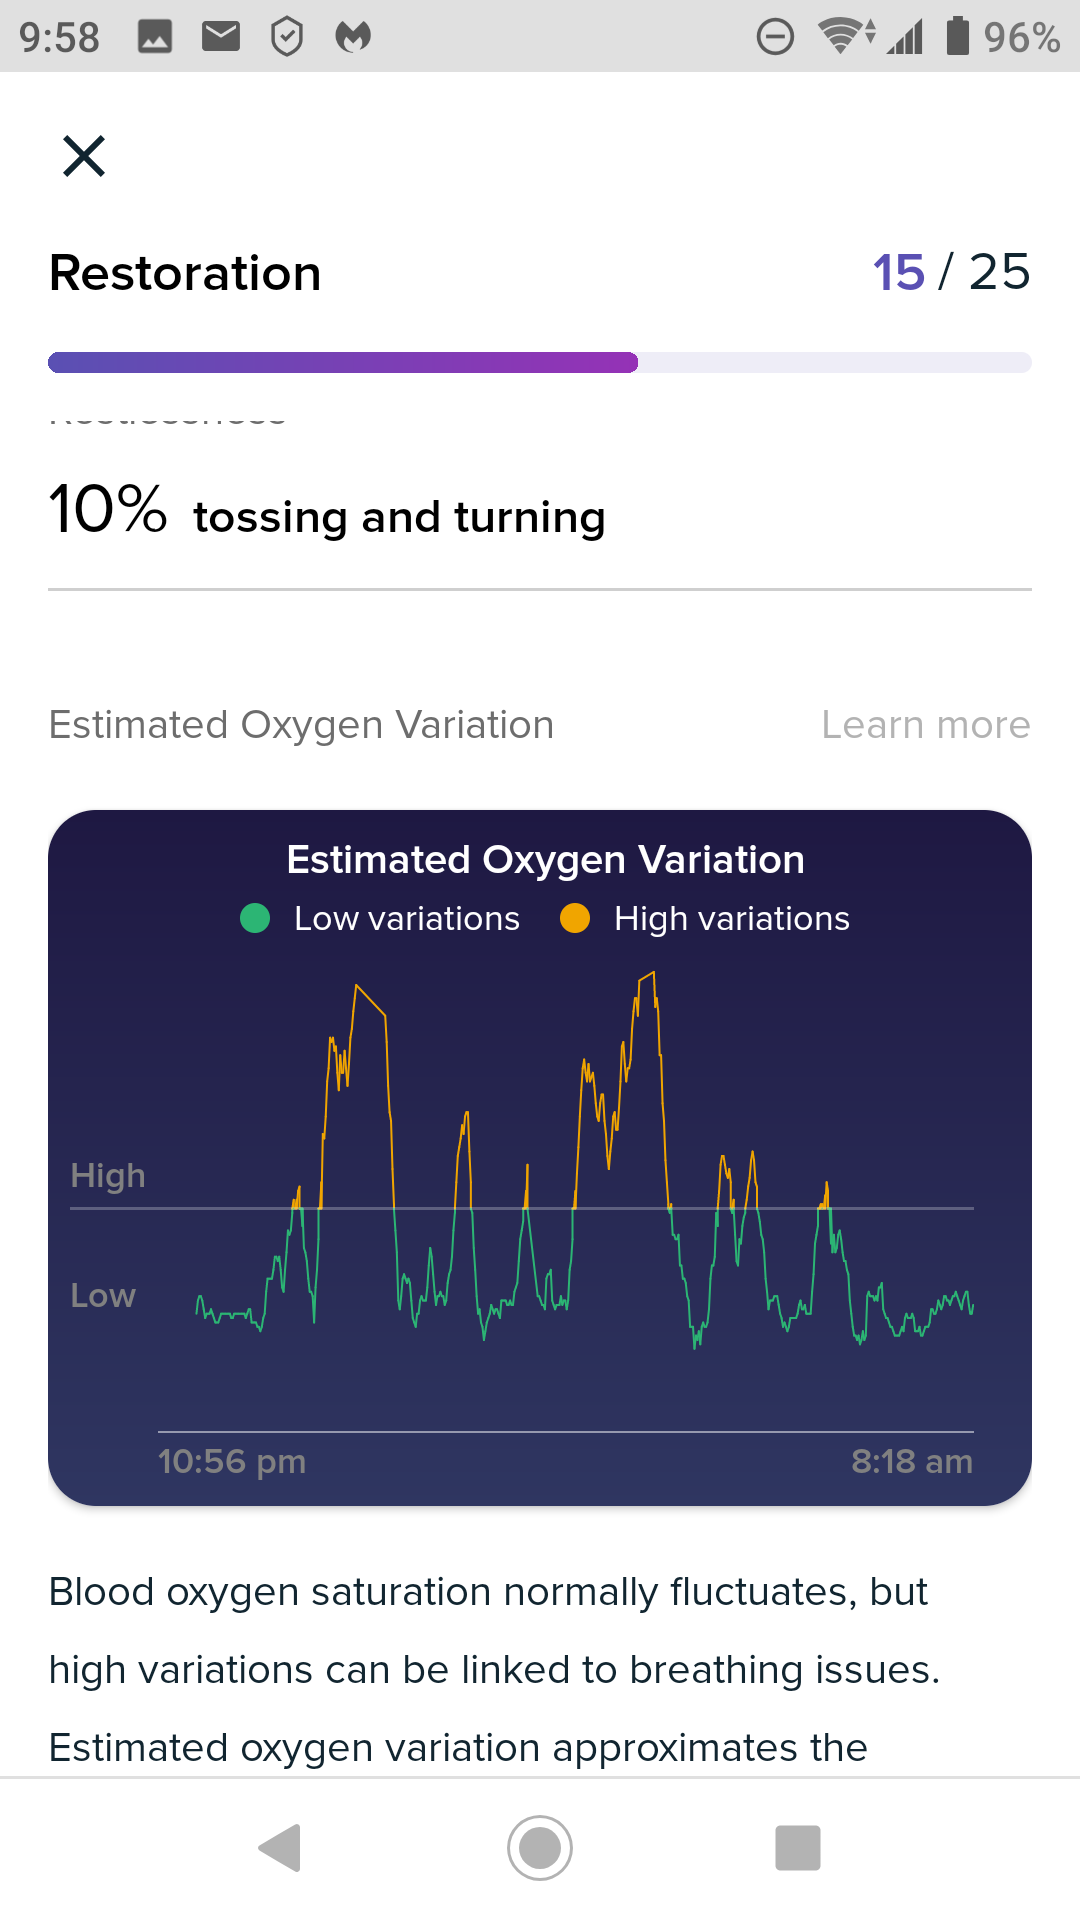 Solved: Estimated Oxygen Variability is 